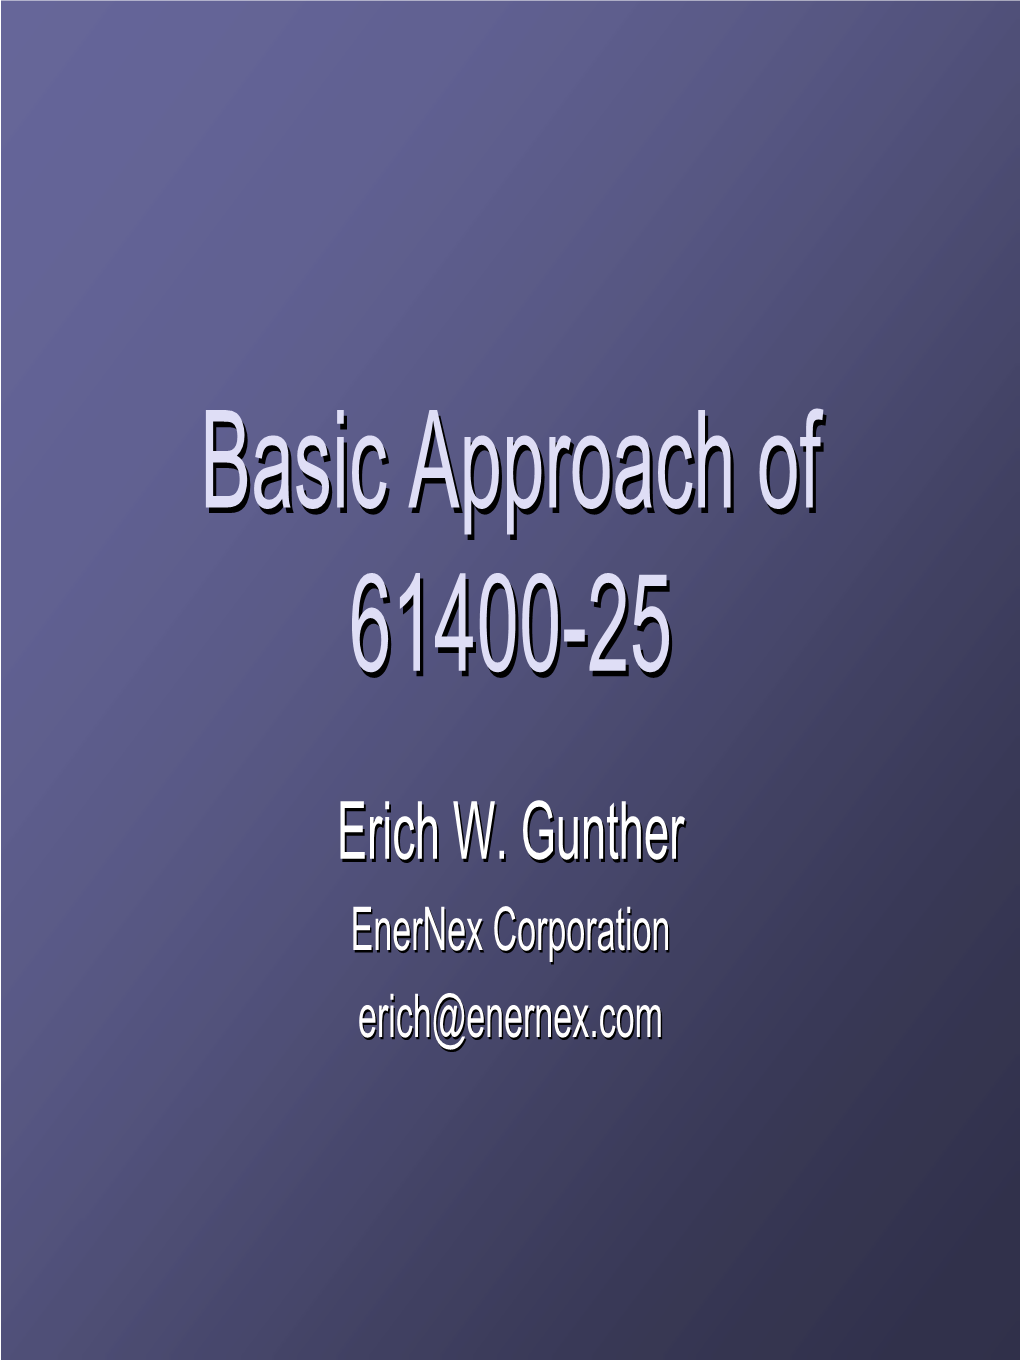 Basic Approach of 61400-25